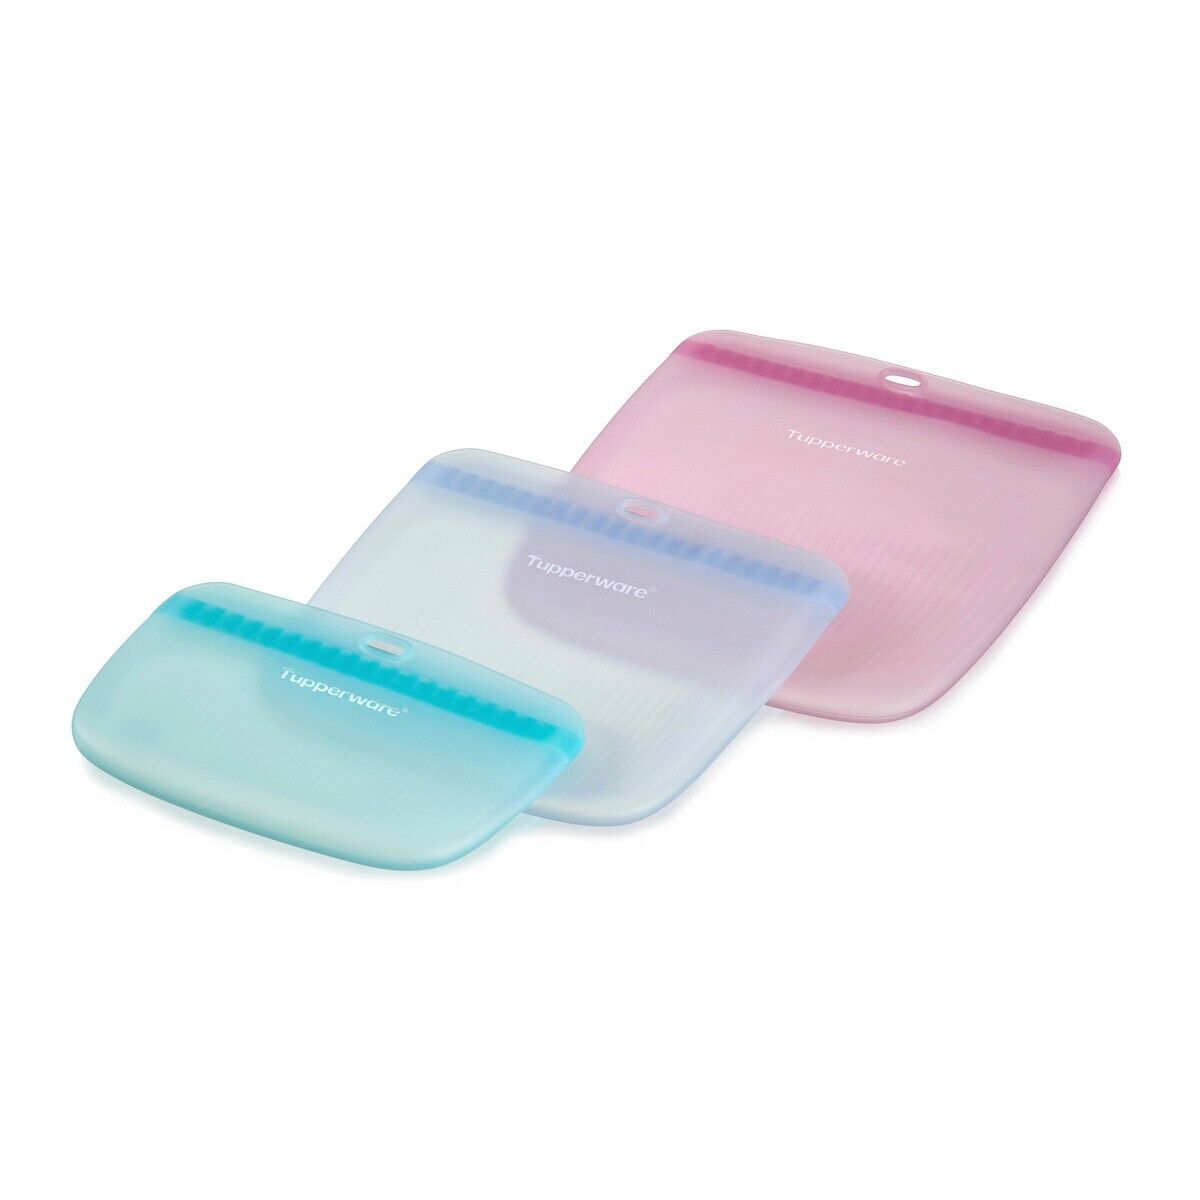 Tupperware The Ultimate Silicone Slim Bag Freezer Oven Microwave Safe Set 3 New